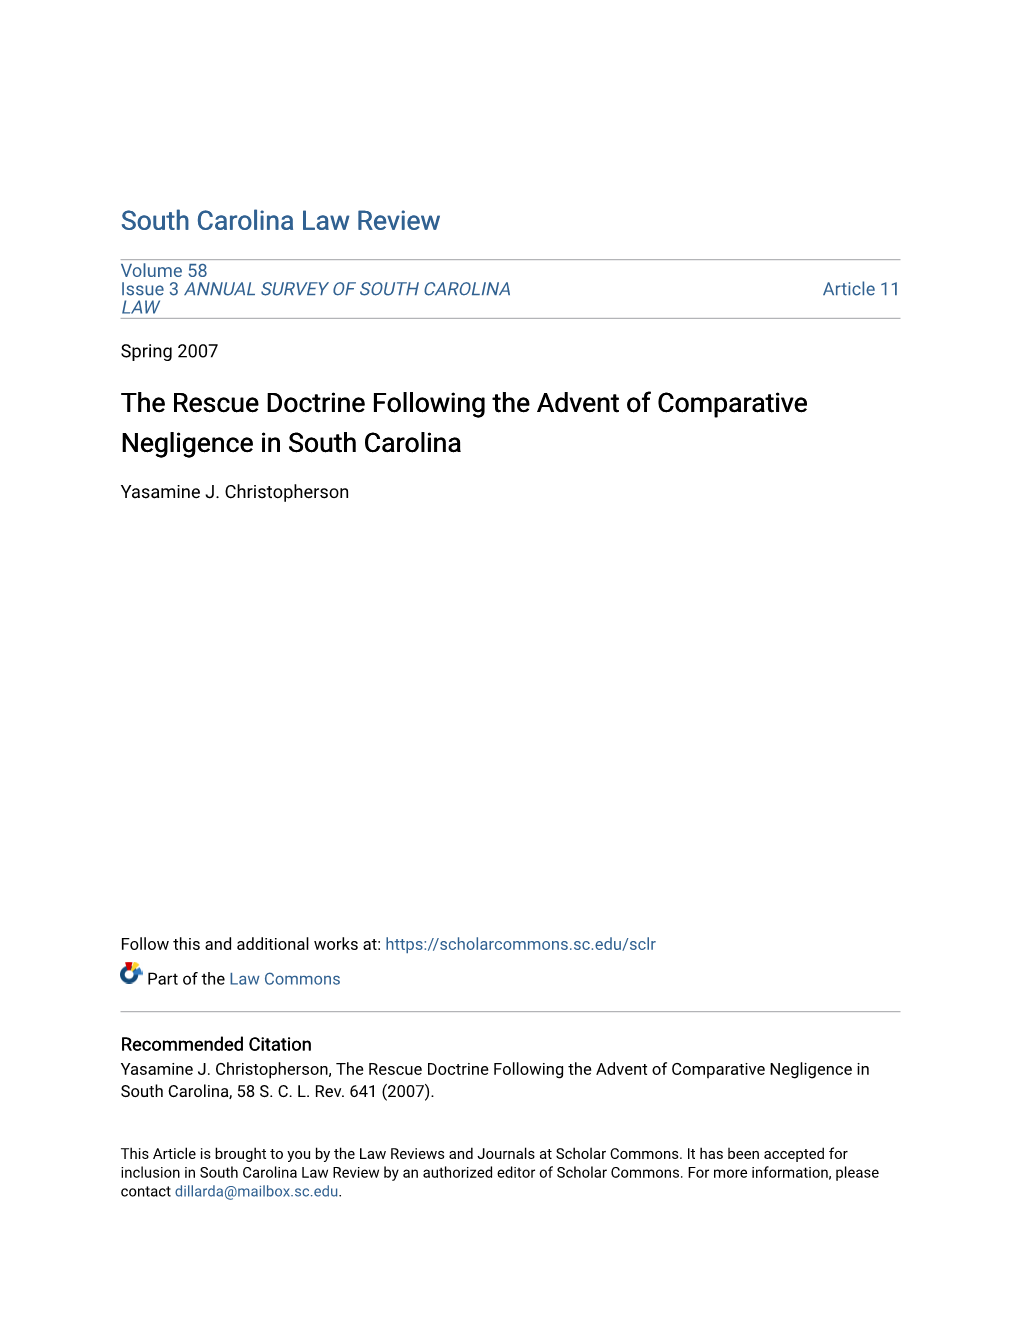 The Rescue Doctrine Following the Advent of Comparative Negligence in South Carolina